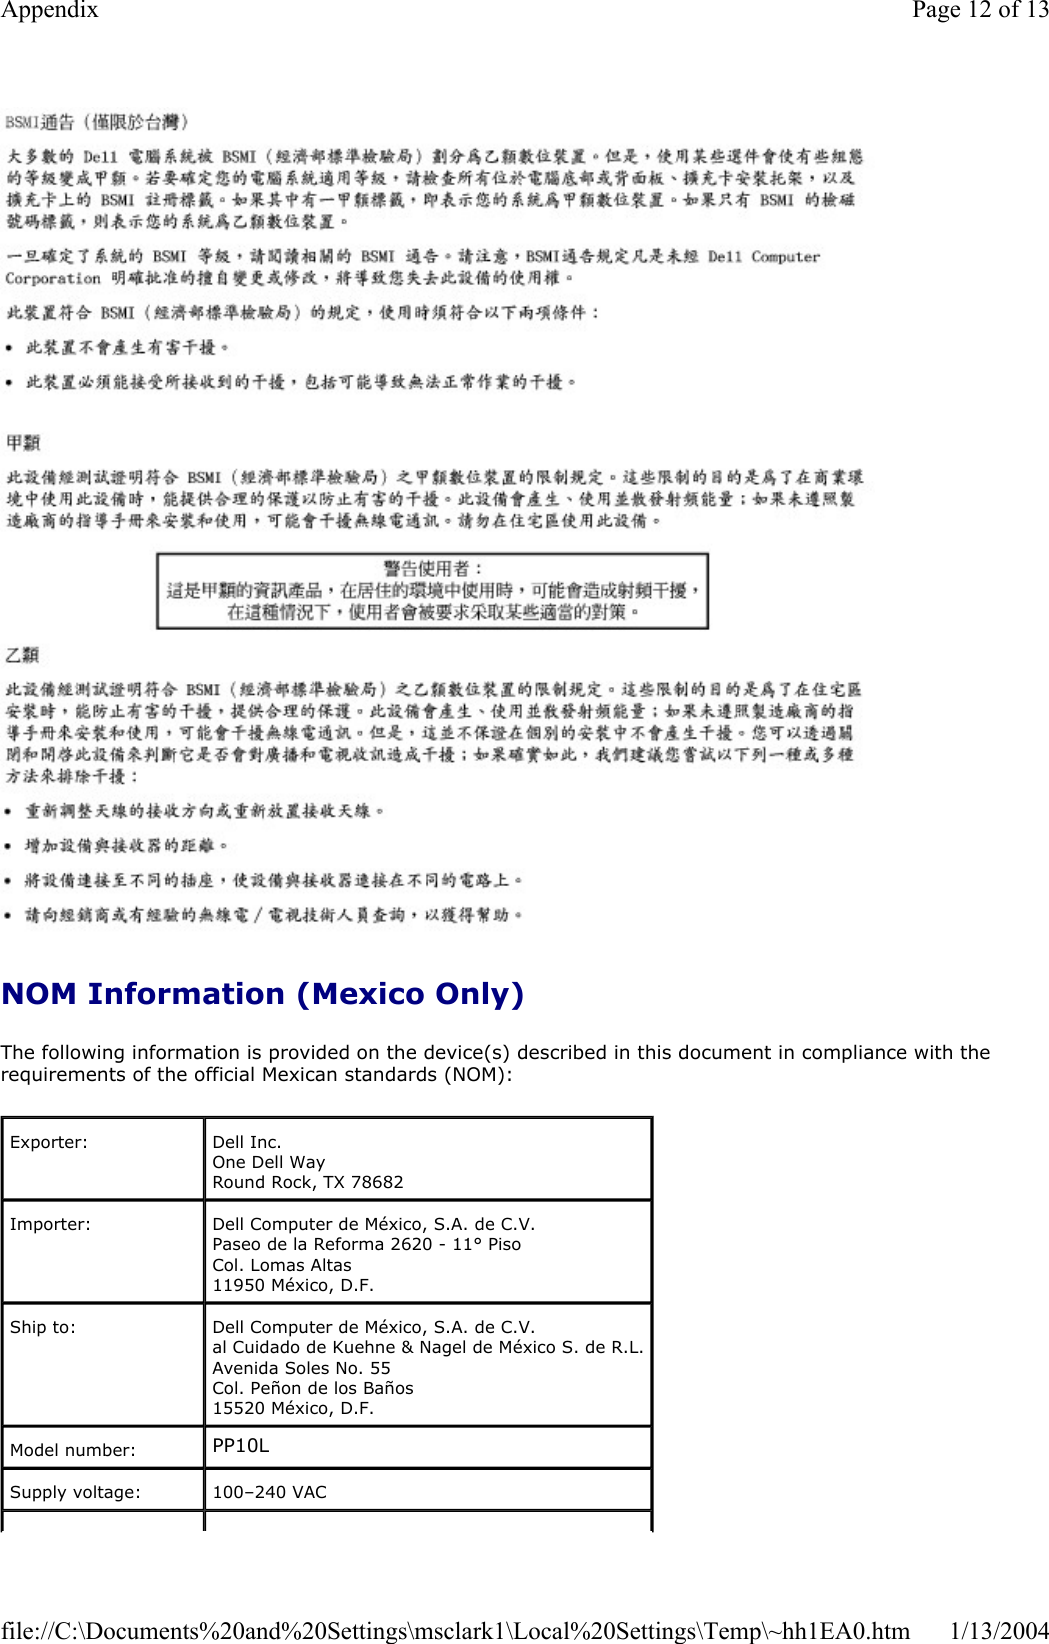 NOM Information (Mexico Only) The following information is provided on the device(s) described in this document in compliance with the requirements of the official Mexican standards (NOM): Exporter:   Dell Inc. One Dell Way Round Rock, TX 78682 Importer: Dell Computer de México, S.A. de C.V.  Paseo de la Reforma 2620 - 11° Piso  Col. Lomas Altas  11950 México, D.F.  Ship to:  Dell Computer de México, S.A. de C.V.  al Cuidado de Kuehne &amp; Nagel de México S. de R.L. Avenida Soles No. 55 Col. Peñon de los Baños 15520 México, D.F. Model number:  PP10L Supply voltage:  100–240 VAC Page 12 of 13Appendix1/13/2004file://C:\Documents%20and%20Settings\msclark1\Local%20Settings\Temp\~hh1EA0.htm